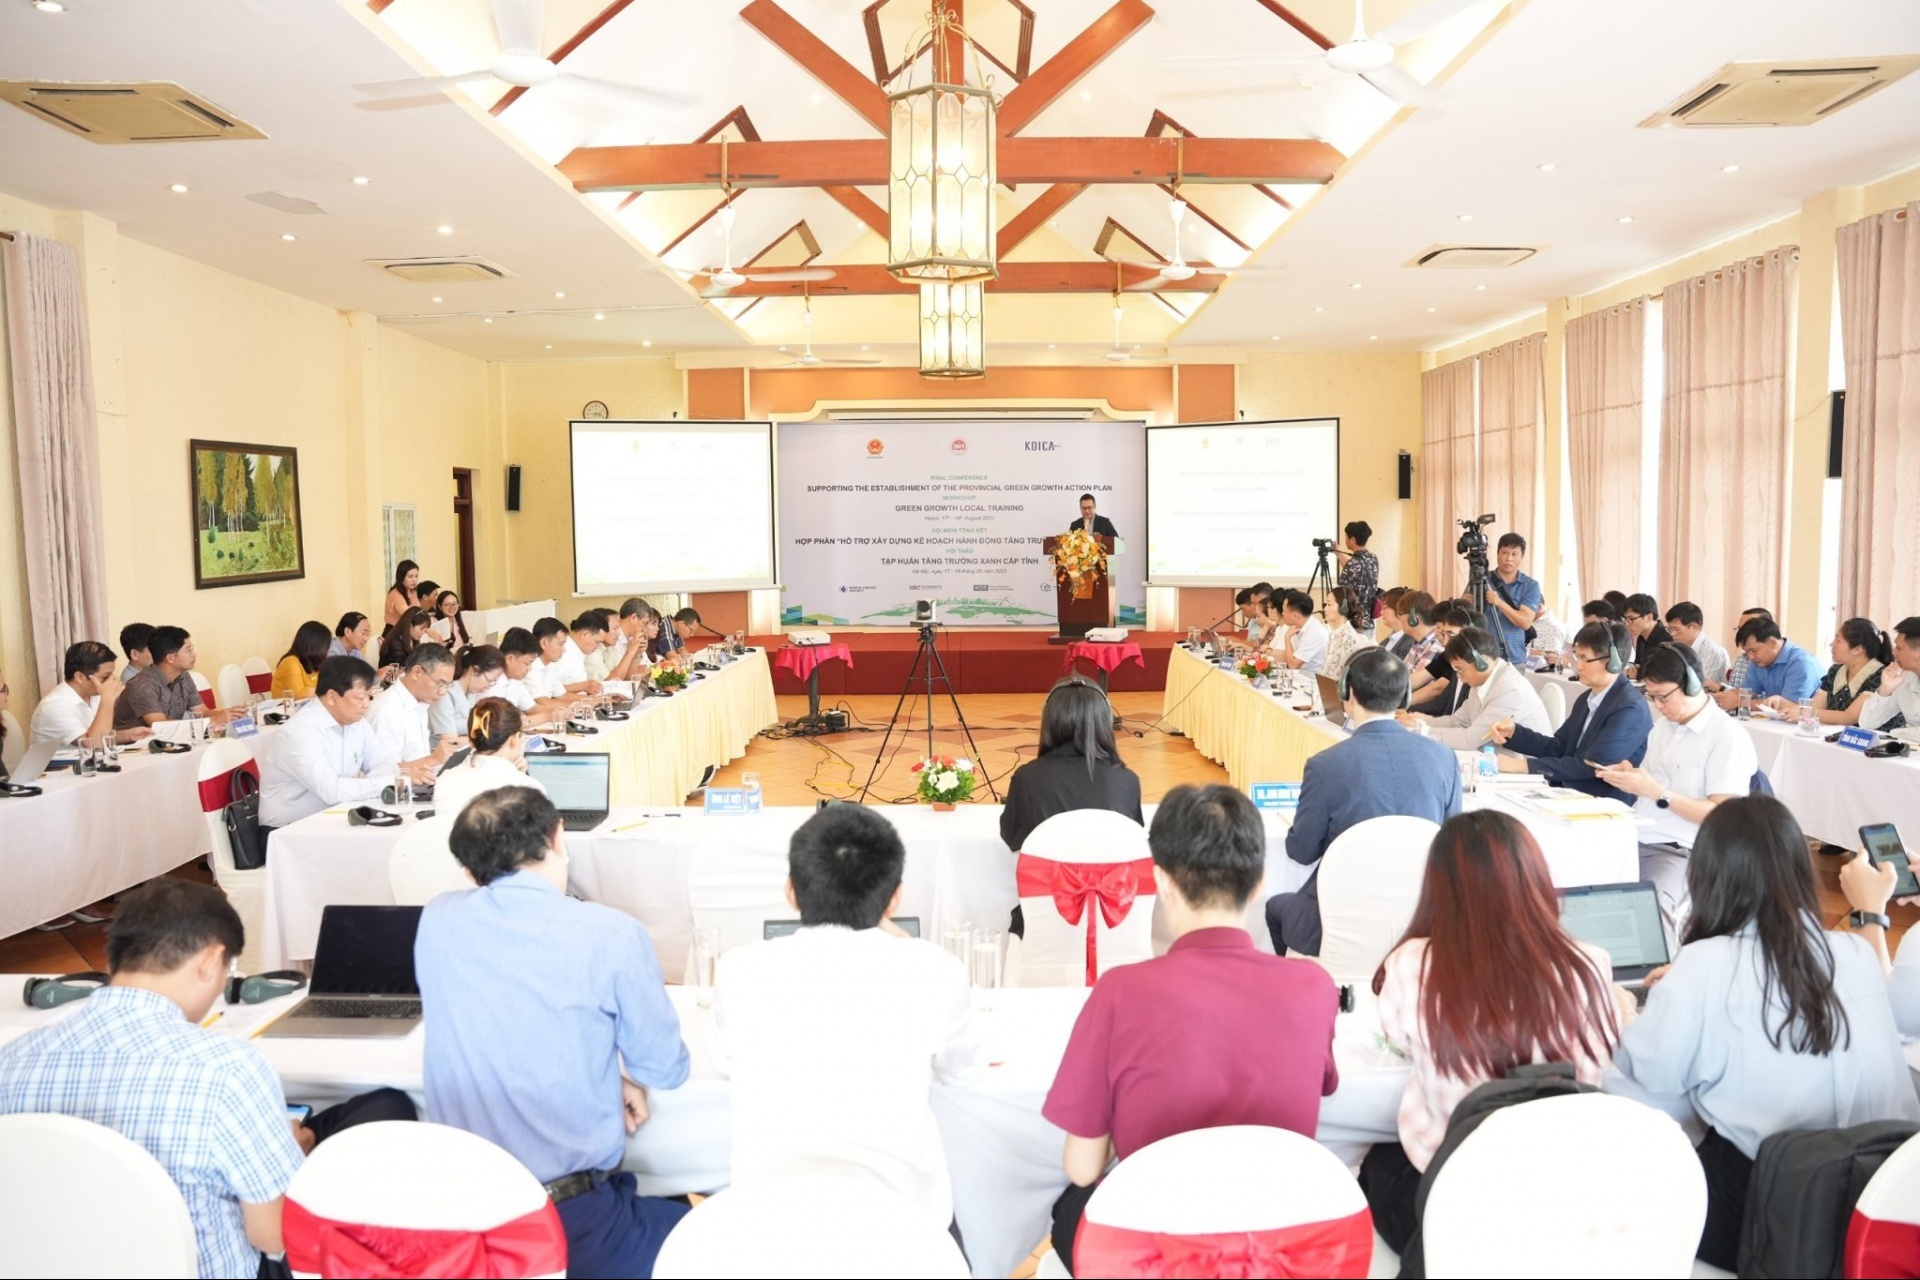 KOICA held conference on green growth action plans